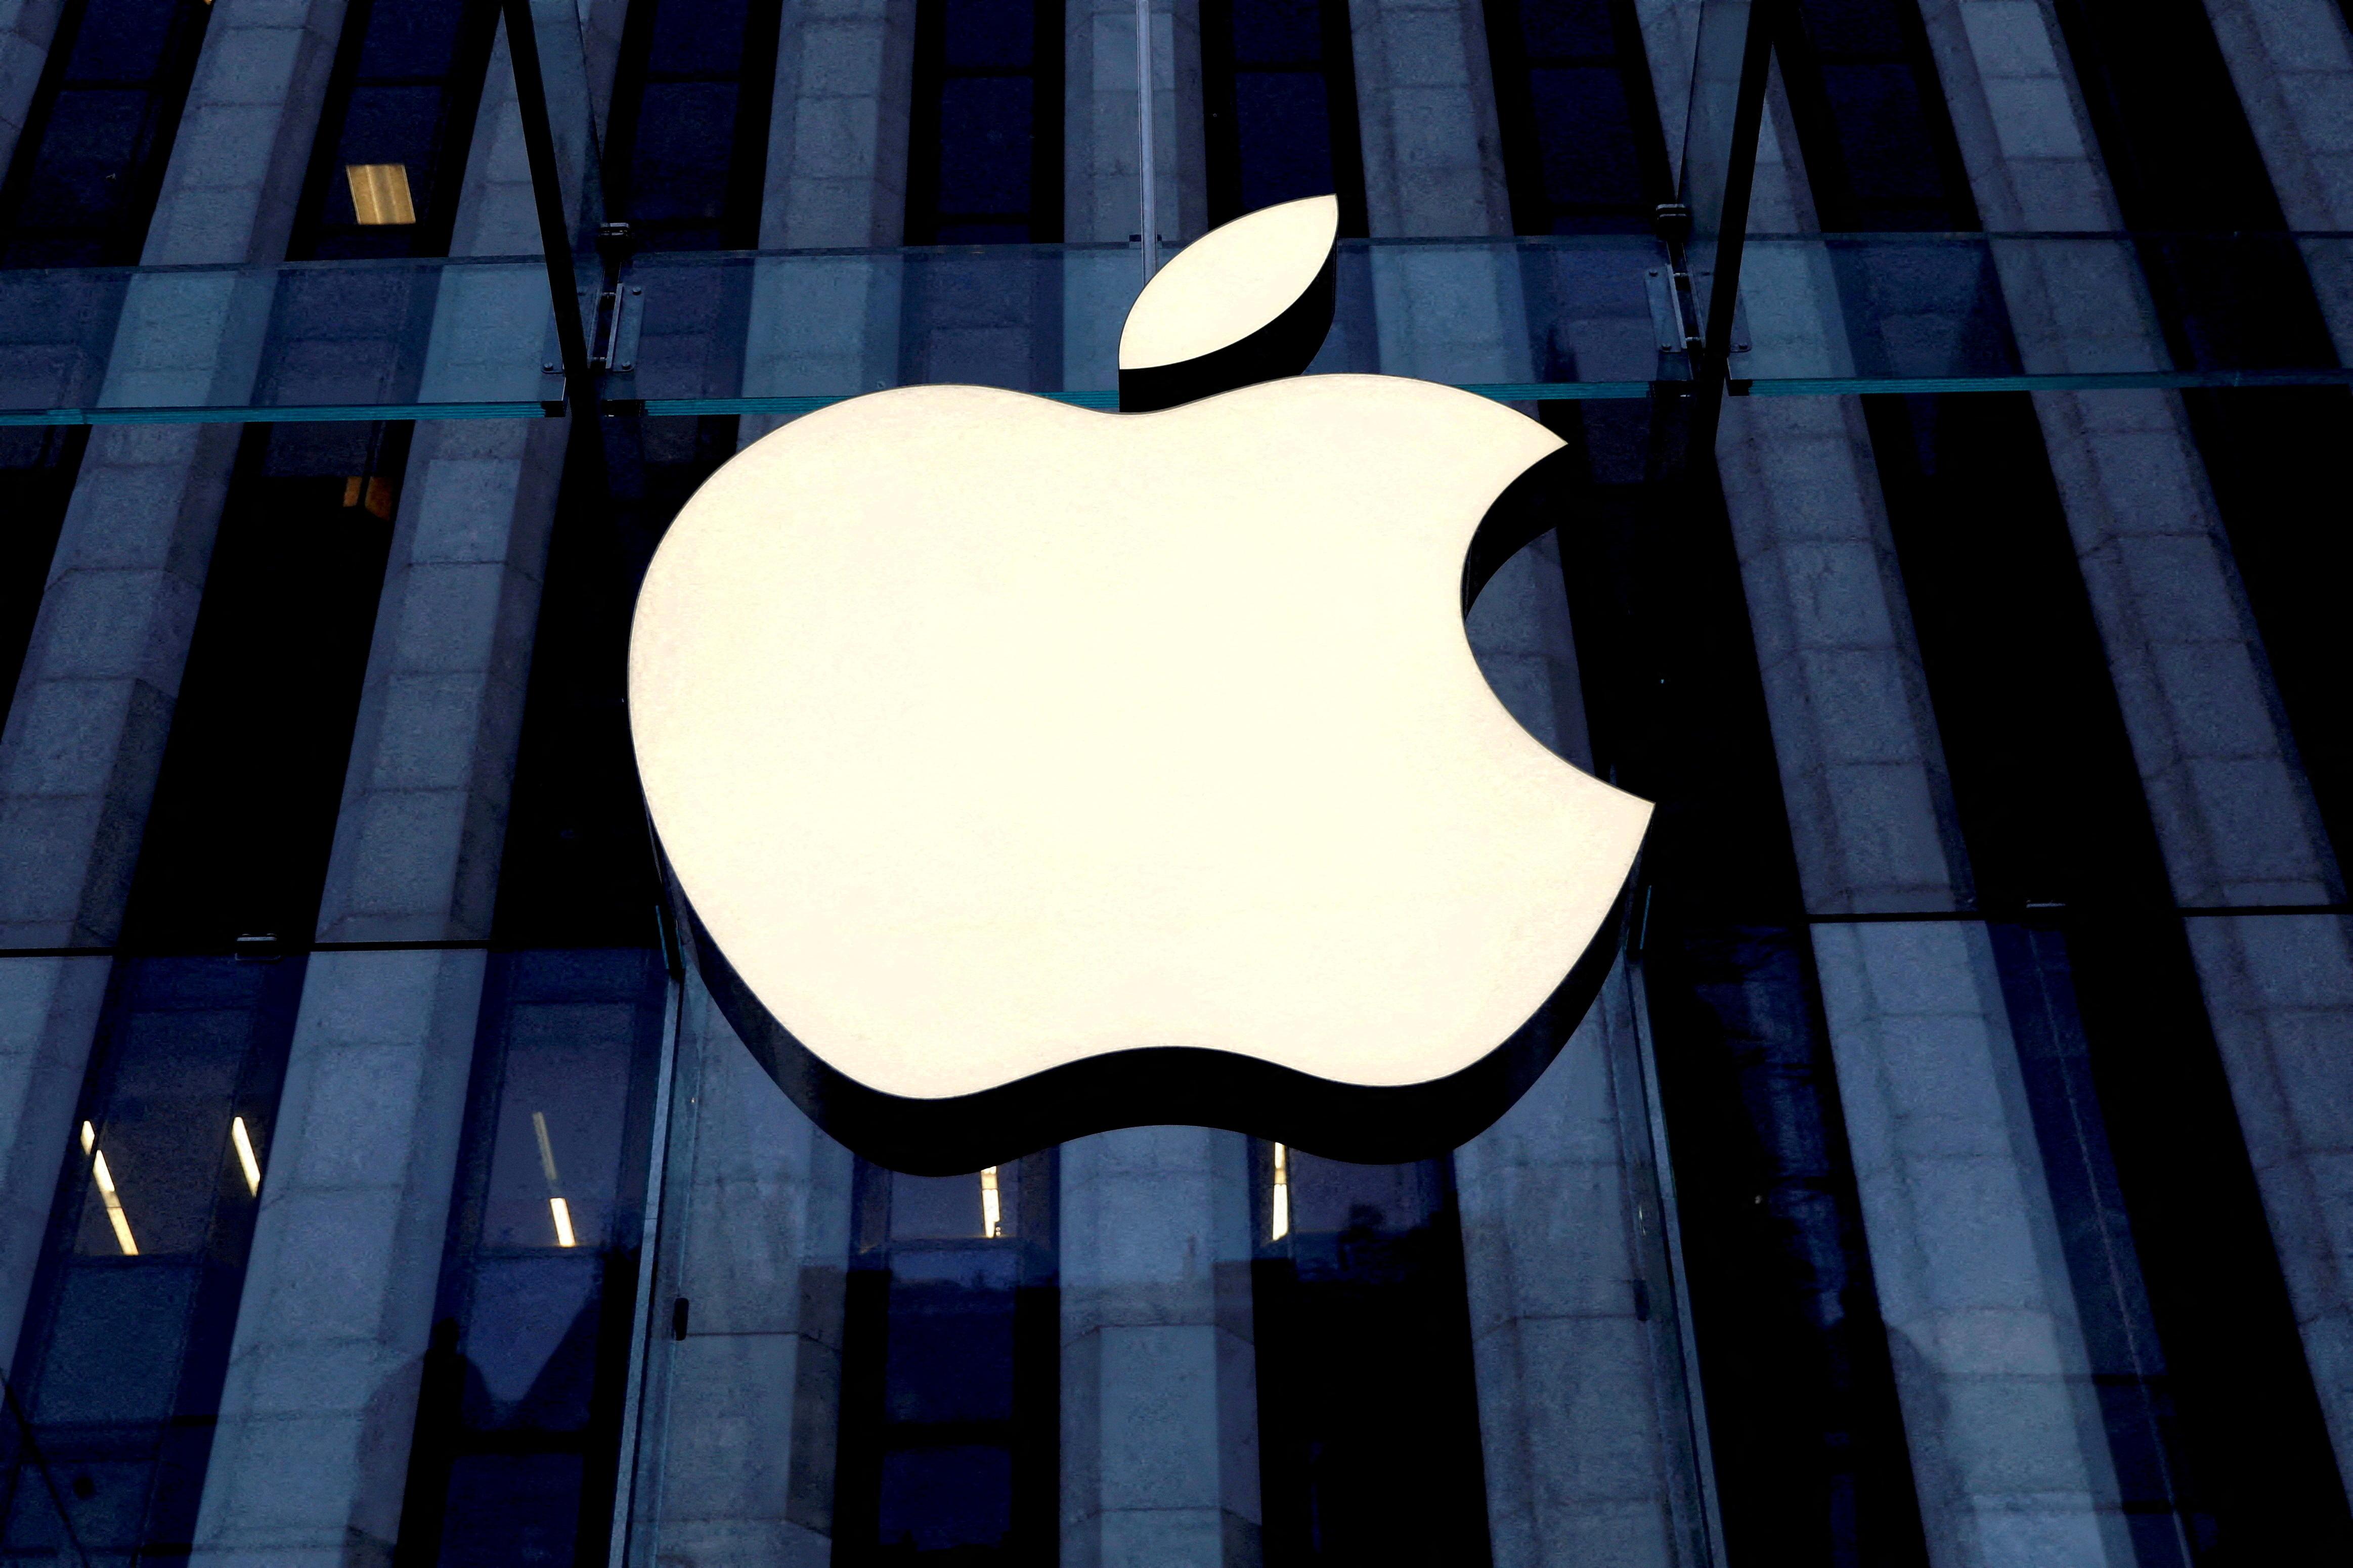 Apple is working on developing its own AI chip for data centers: WSJ